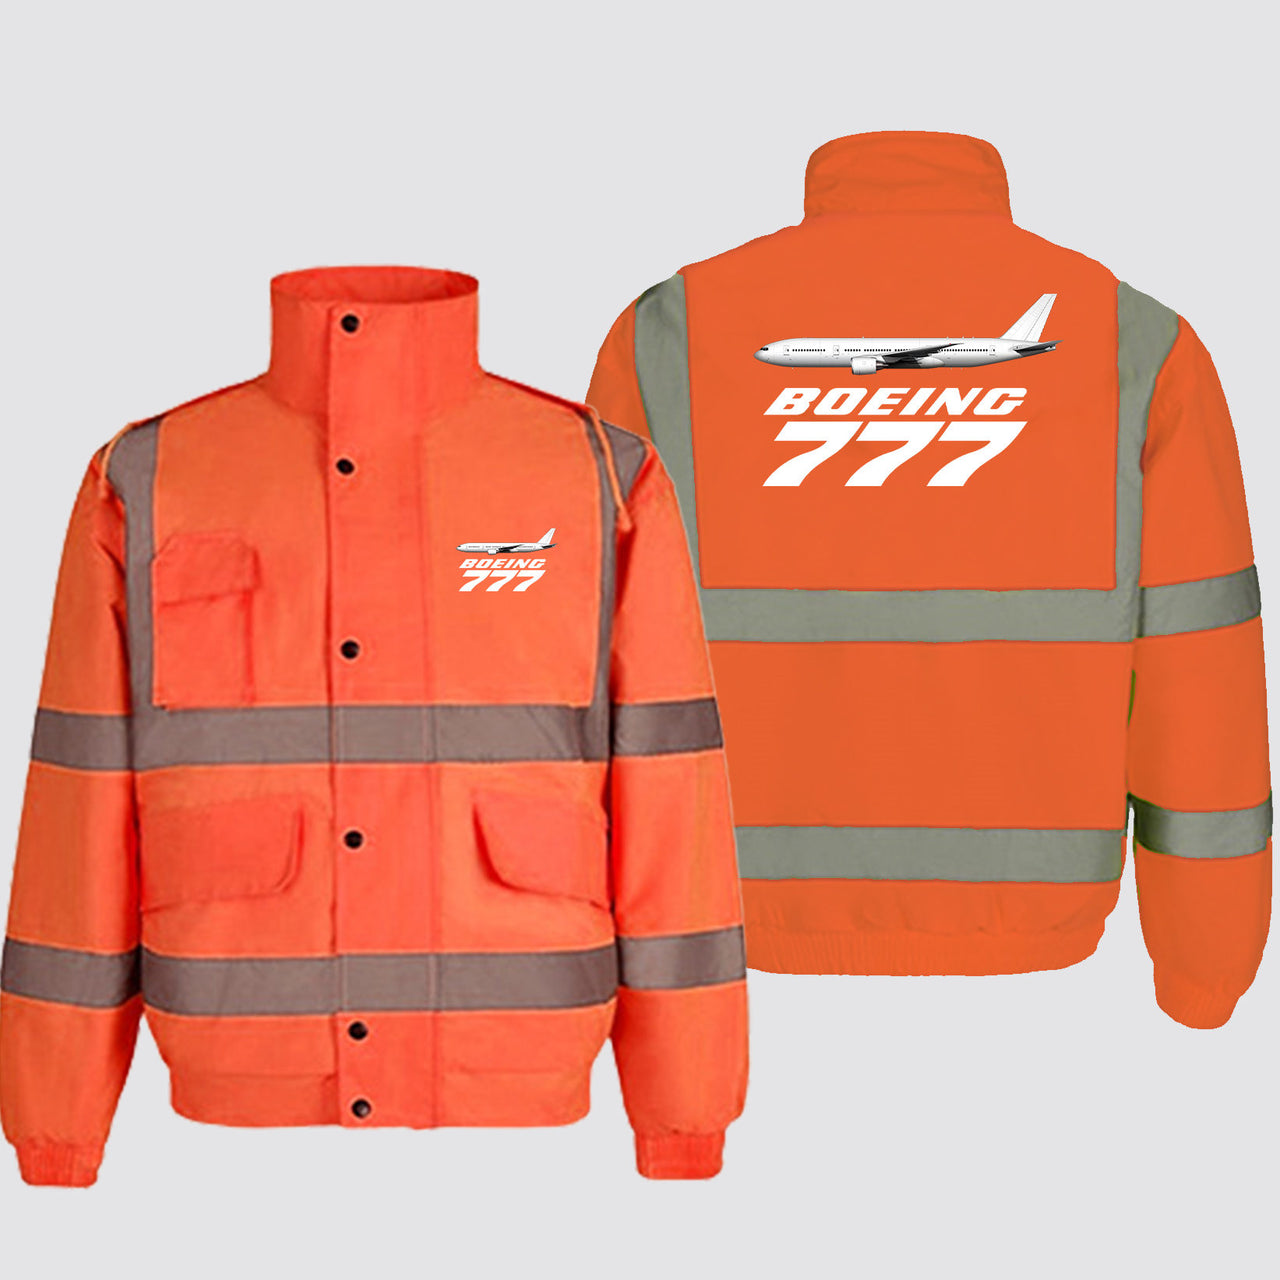 The Boeing 777 Designed Reflective Winter Jackets